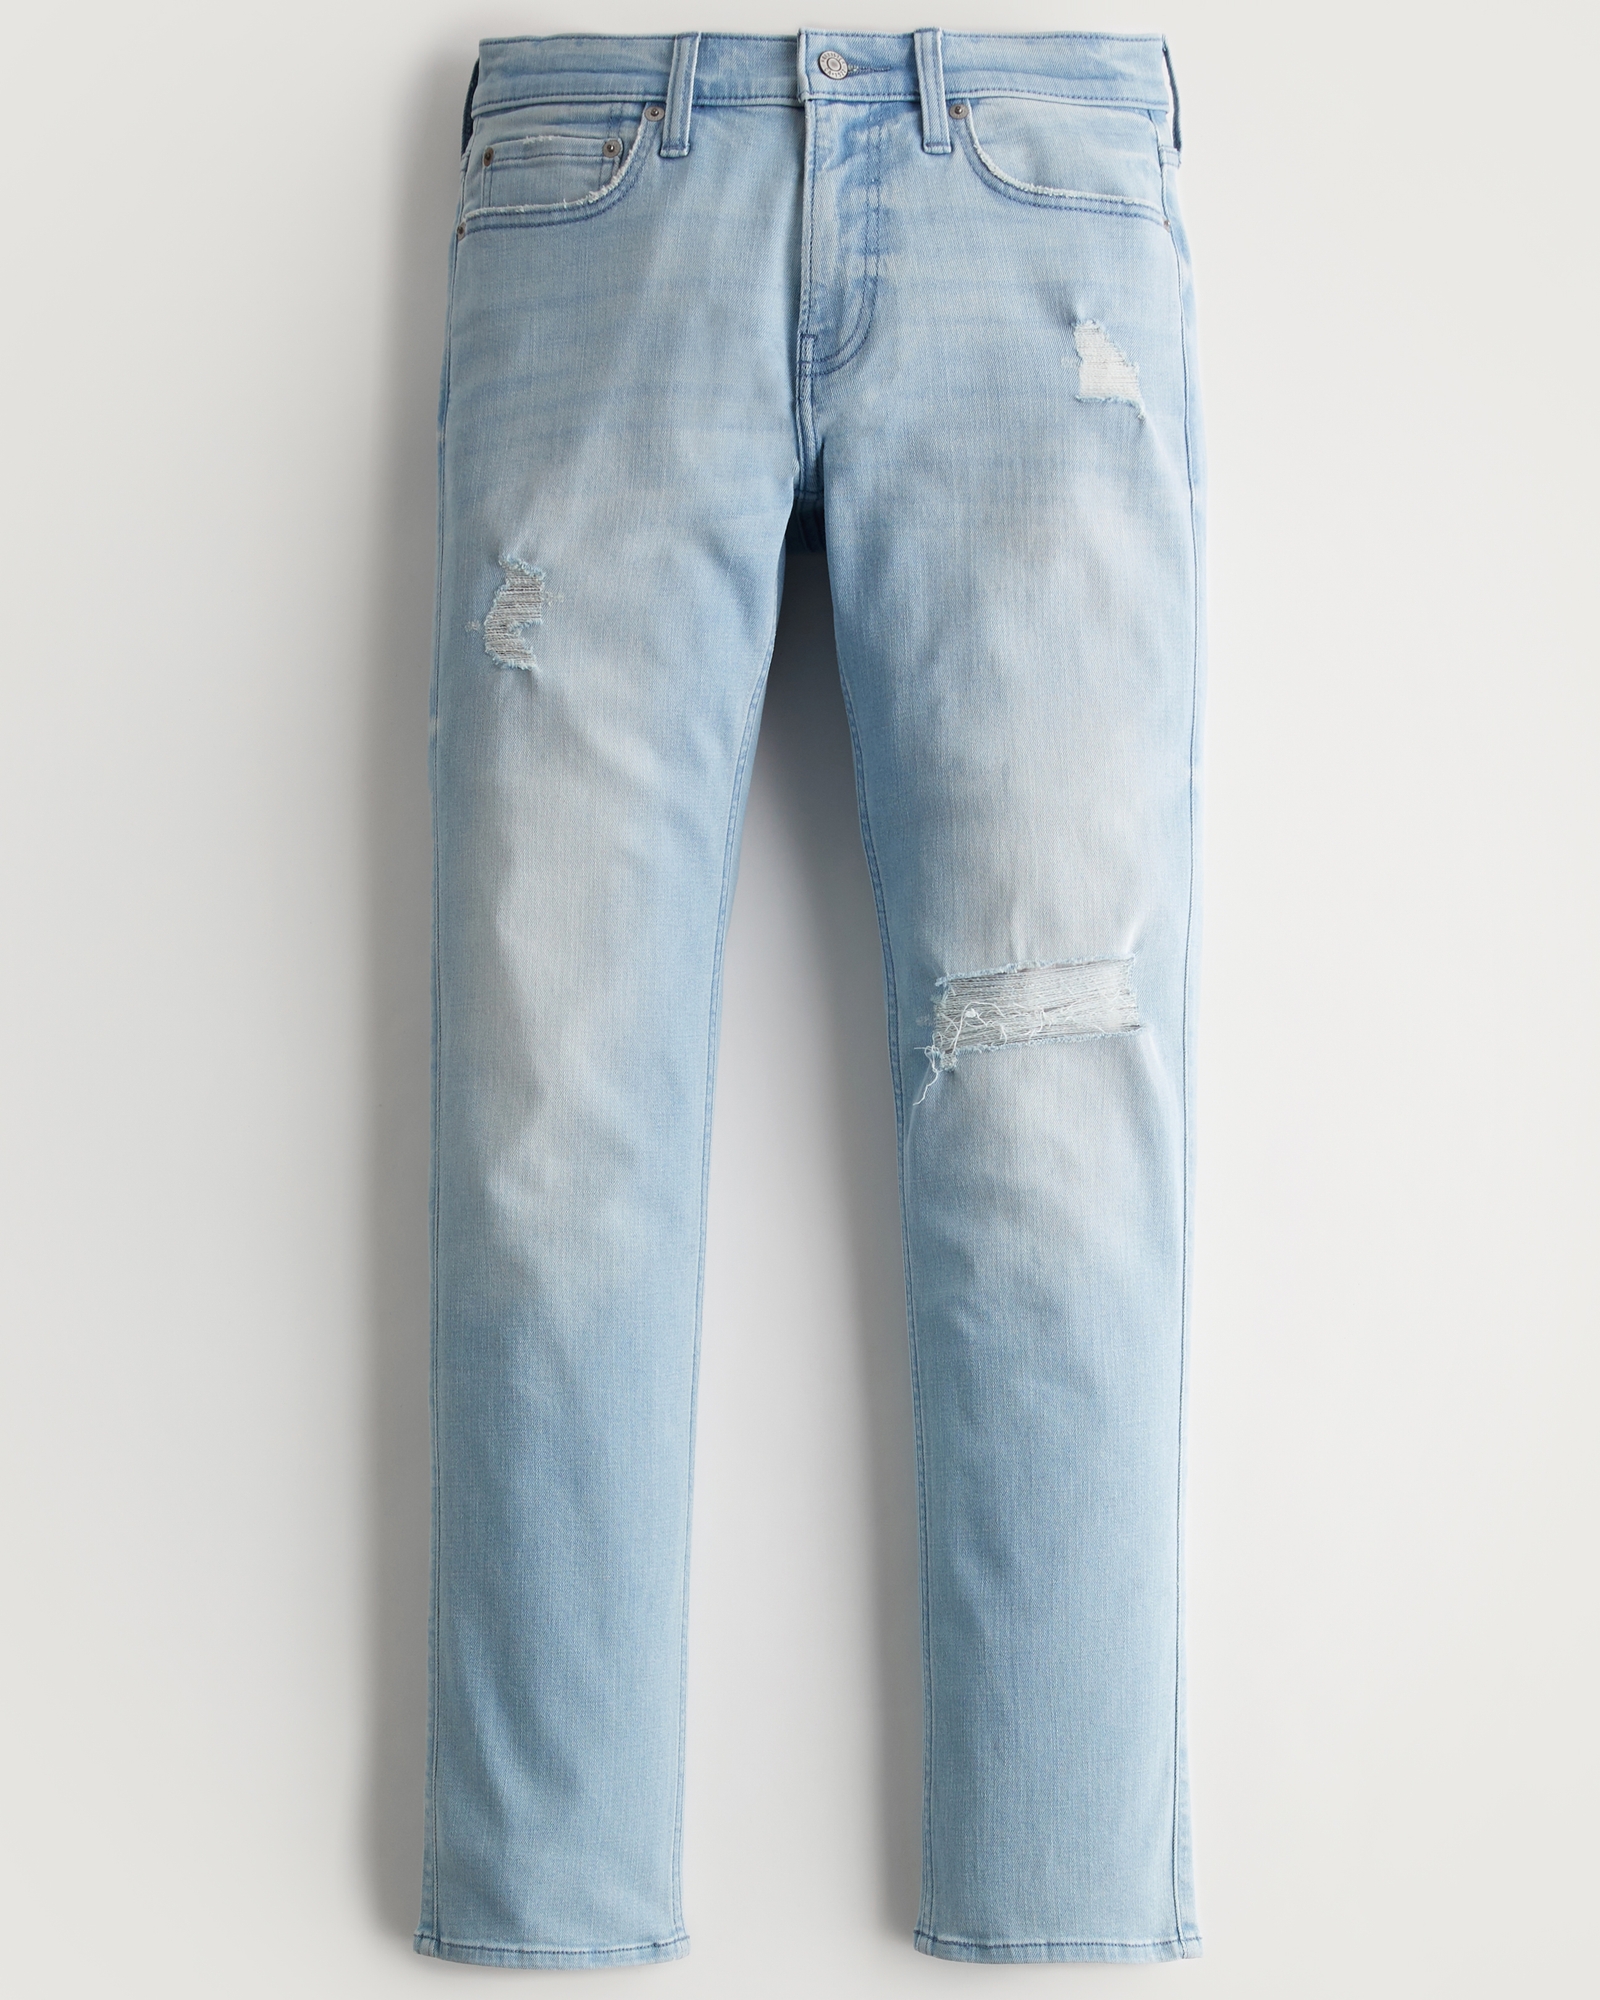 Hollister, Jeans, New Hollister Patchwork Ripped Straight Leg Jeansin  Light Blue Wash